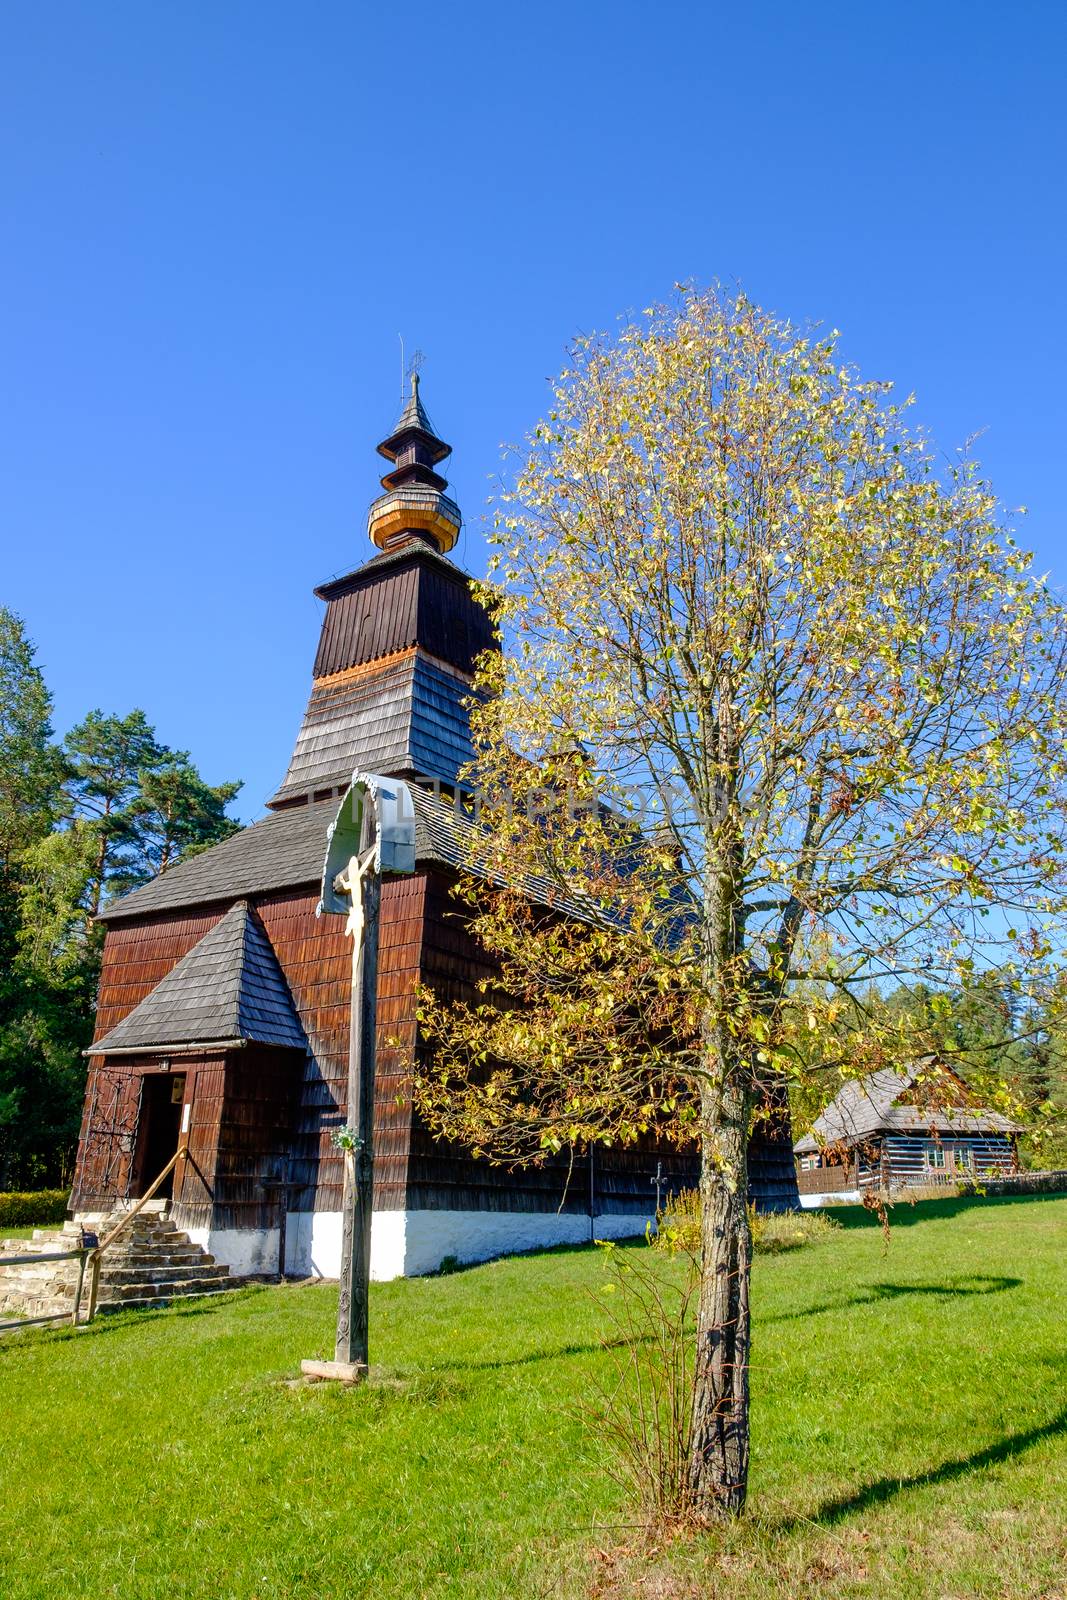 Old traditional Slovak wooden church in Stara Lubovna, Slovakia by martinm303